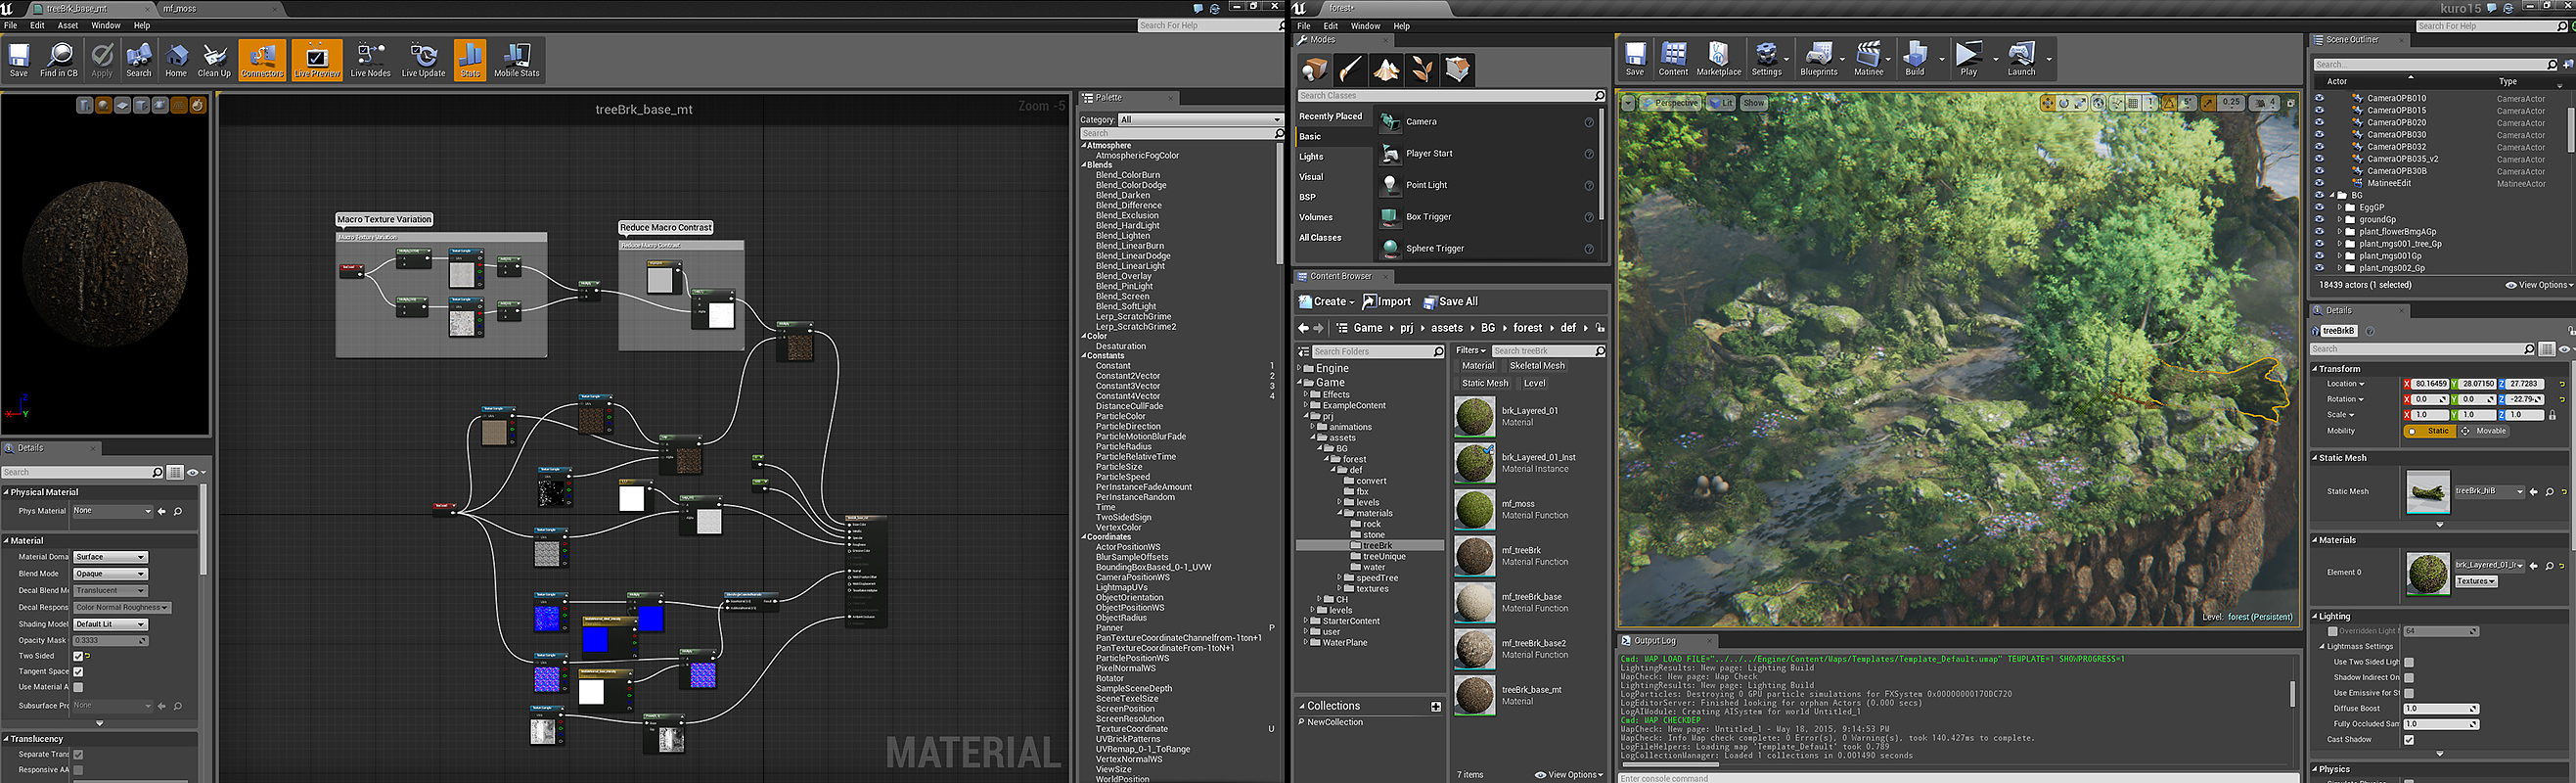 『HAPPY FOREST』Unreal Engine 4のUI